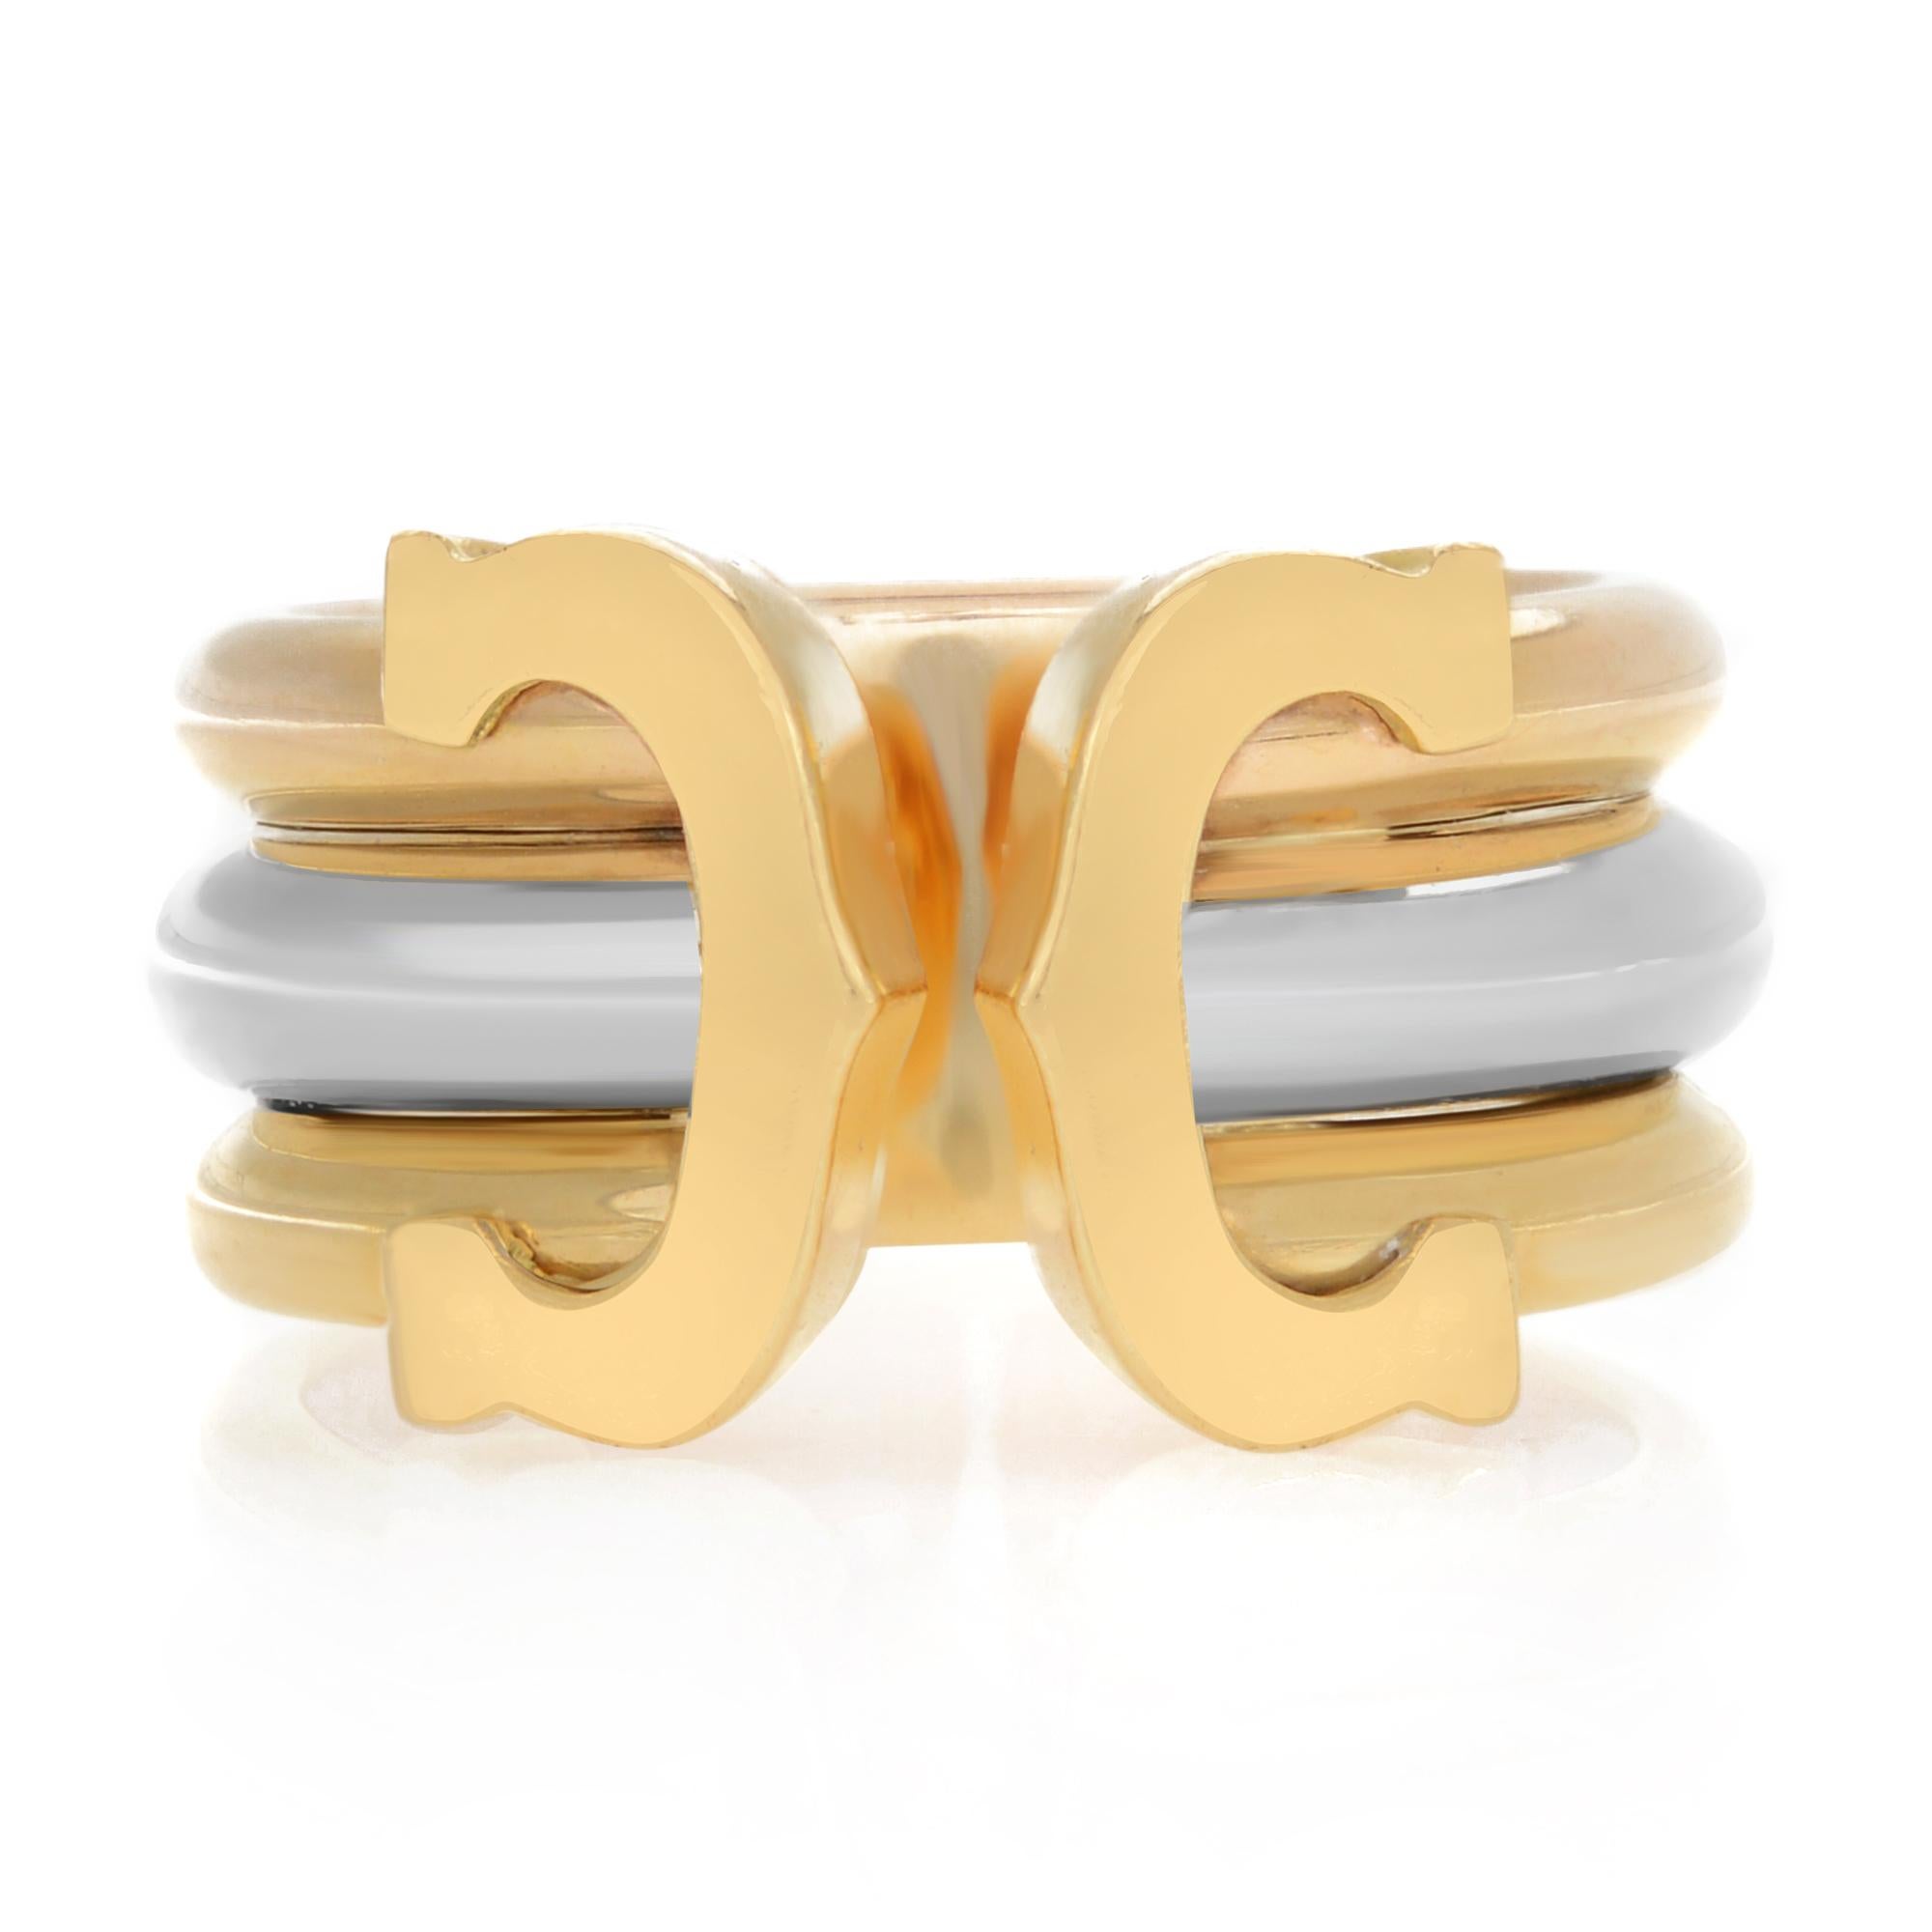 Cartier ring from the Double C Collection, crafted in solid 18k yellow, rose and white gold with a high polished finish. The band has 3 thick wire rings joined and stacked together forming a gorgeous 9mm wide band. It is fully signed by the designer